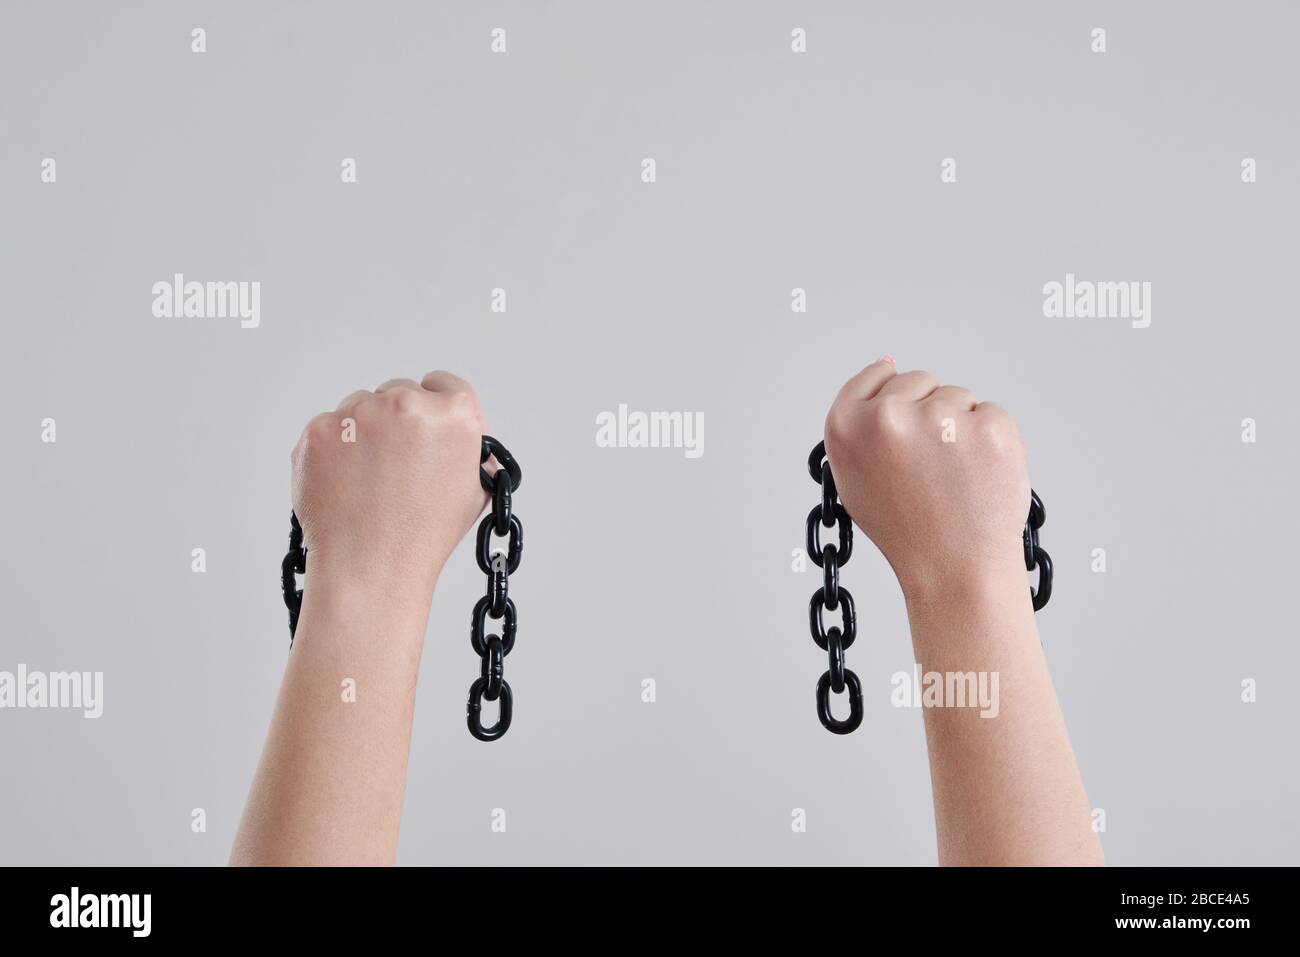 Female hands holding a broken metal chain over grey background with copy space Stock Photo